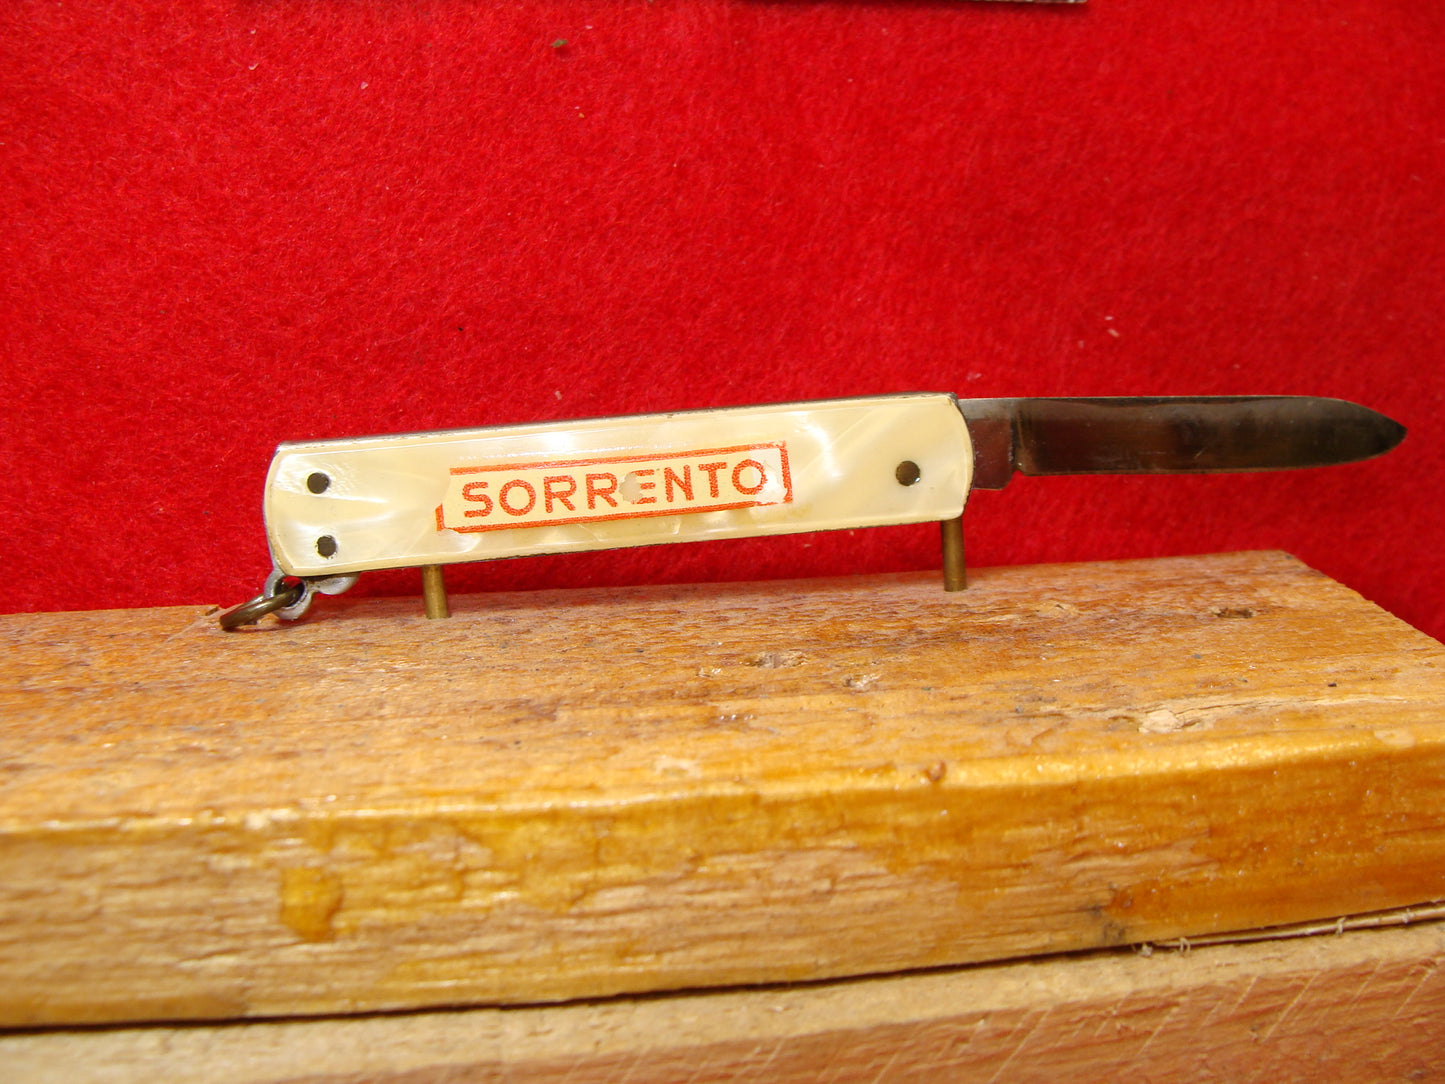 BREVETT UNMARKED ITALY 1950-58 PULL TAB ITALIAN AUTOMATIC KNIFE CRACKED ICE CELLULOID HANDLES-ETCH: SORRENTO.